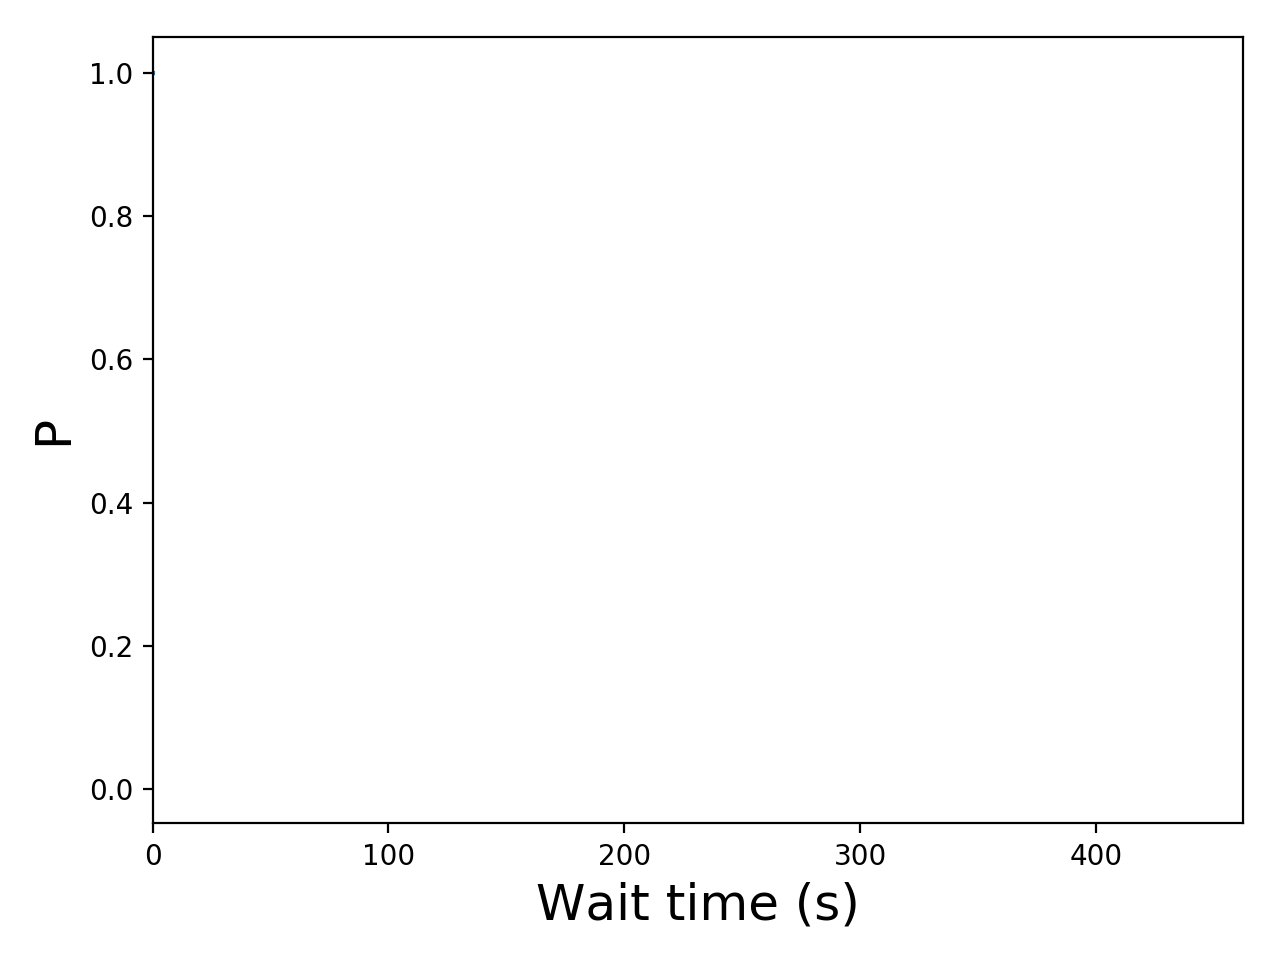 Task wait time CDF graph for the askalon-new_ee24 trace.